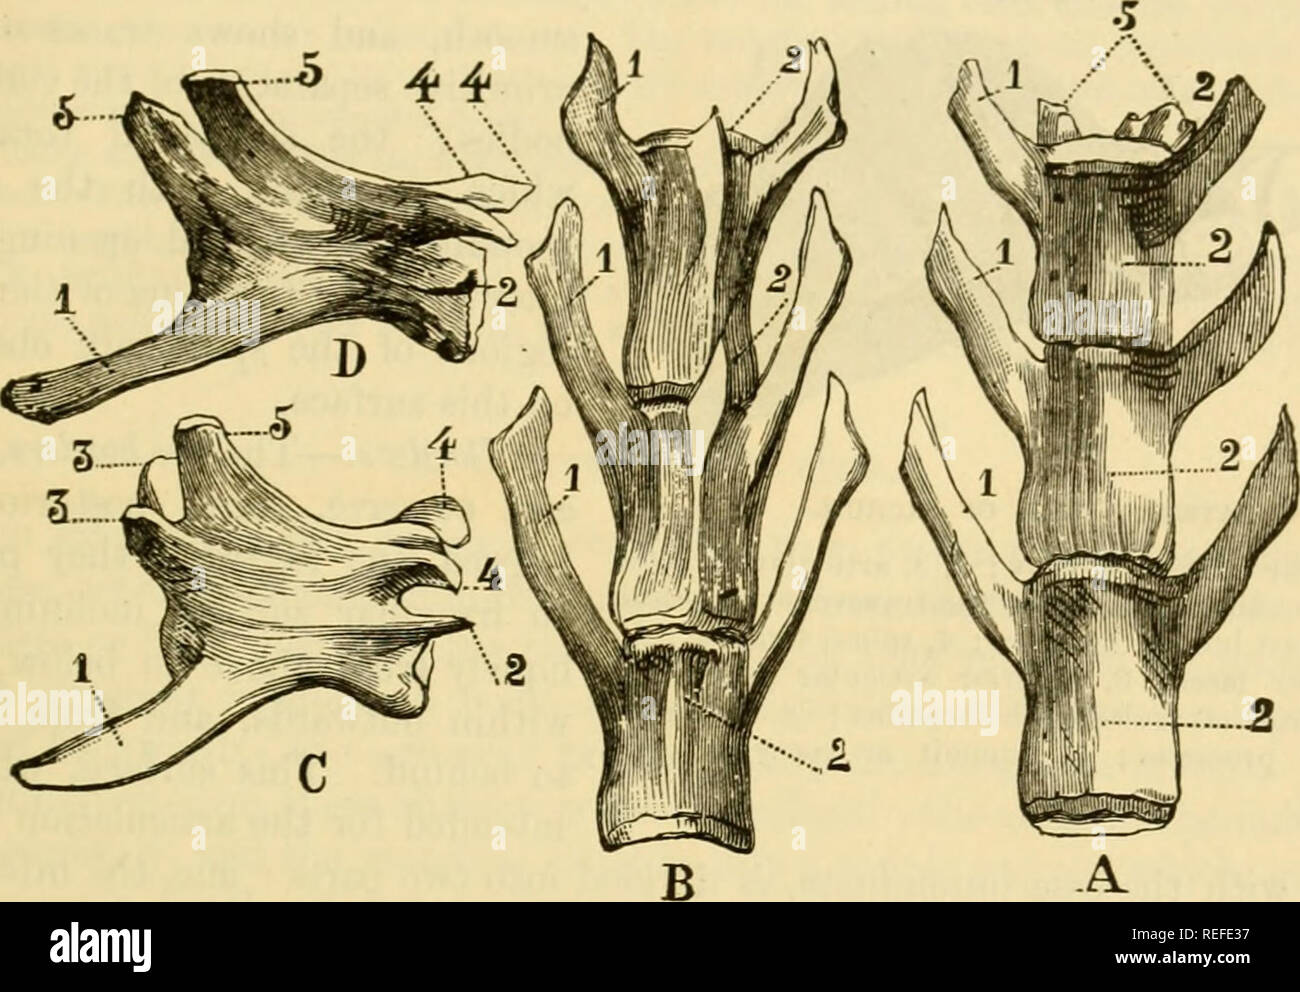 . The comparative anatomy of the domesticated animals. Horses; Veterinary anatomy. TEE VERTEBRA. 39 The transverse proceBsea incline very much forward and downward; tliey become longer from the first to the Becoiul-last bone ; in the latter tliey become contracted, and in the seventh vertebra tliey are still more diminished, and terminate in an obtuse point. The tubercle of the anterior articular process is extremely prominent, iin&lt;l the posterior notches are surmounted by a small, very acute prolongation, directed backwards, which becomes more developed towards tlie anterior vertebrae. Thi Stock Photo